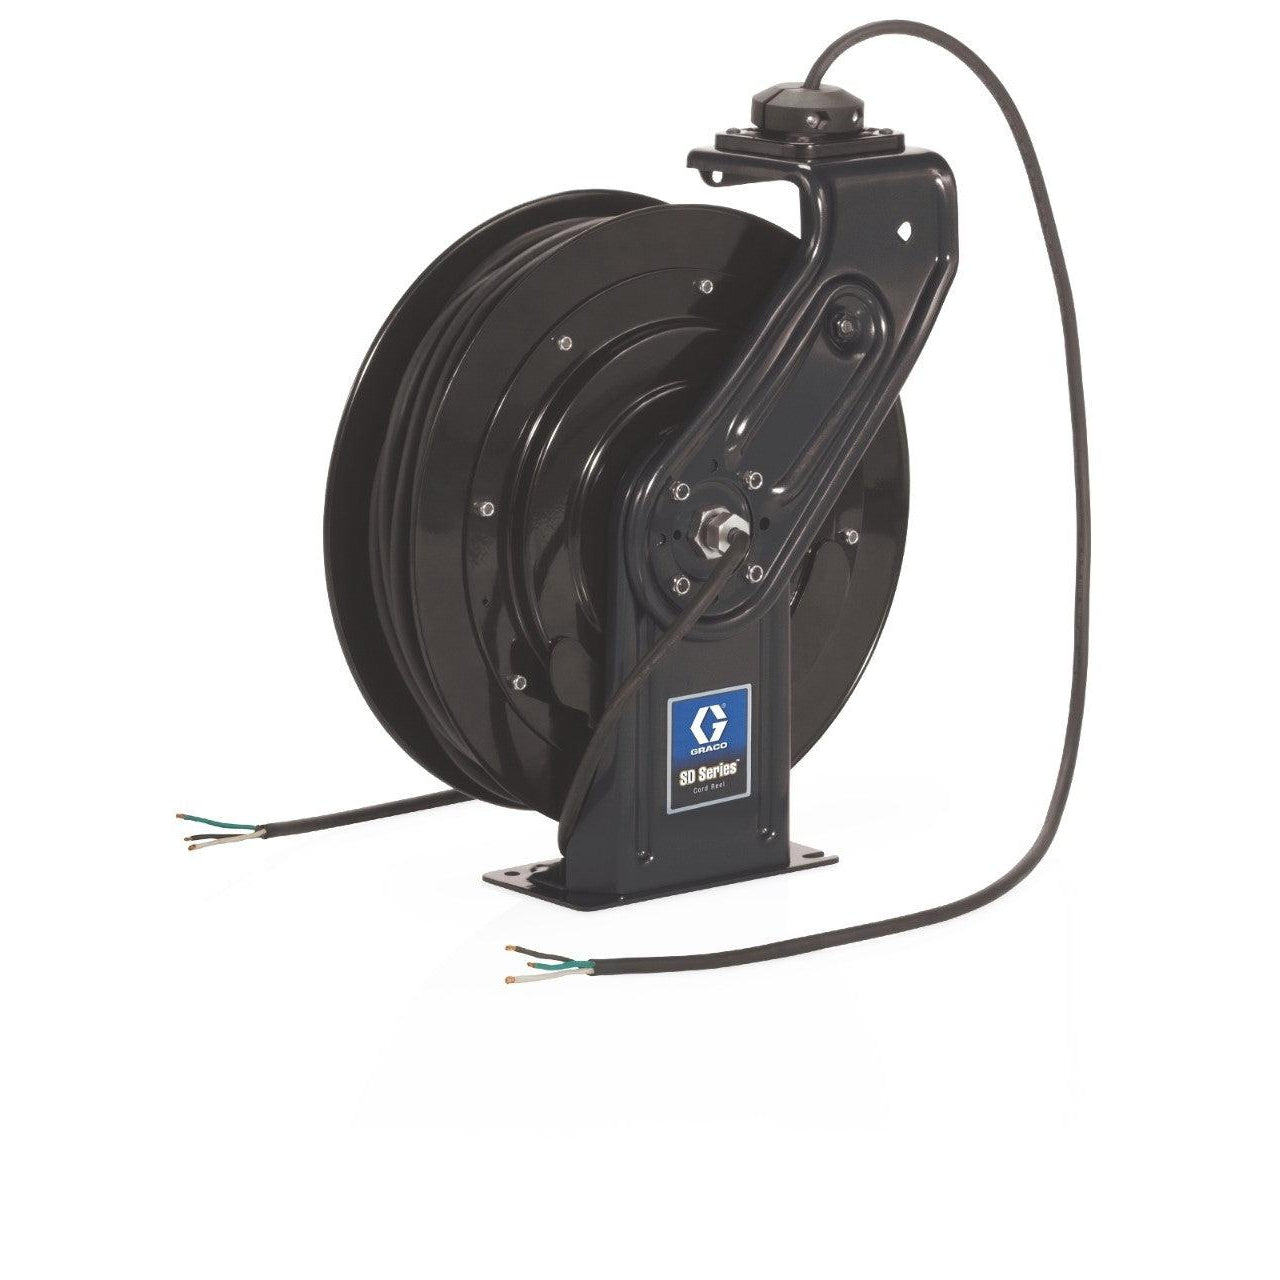 SDª 10 Series 120 Volt Cord Reel - No Accessory, Cord Only - 95 ft (29 m), 16 AWG, 10 Amp Cord - Black